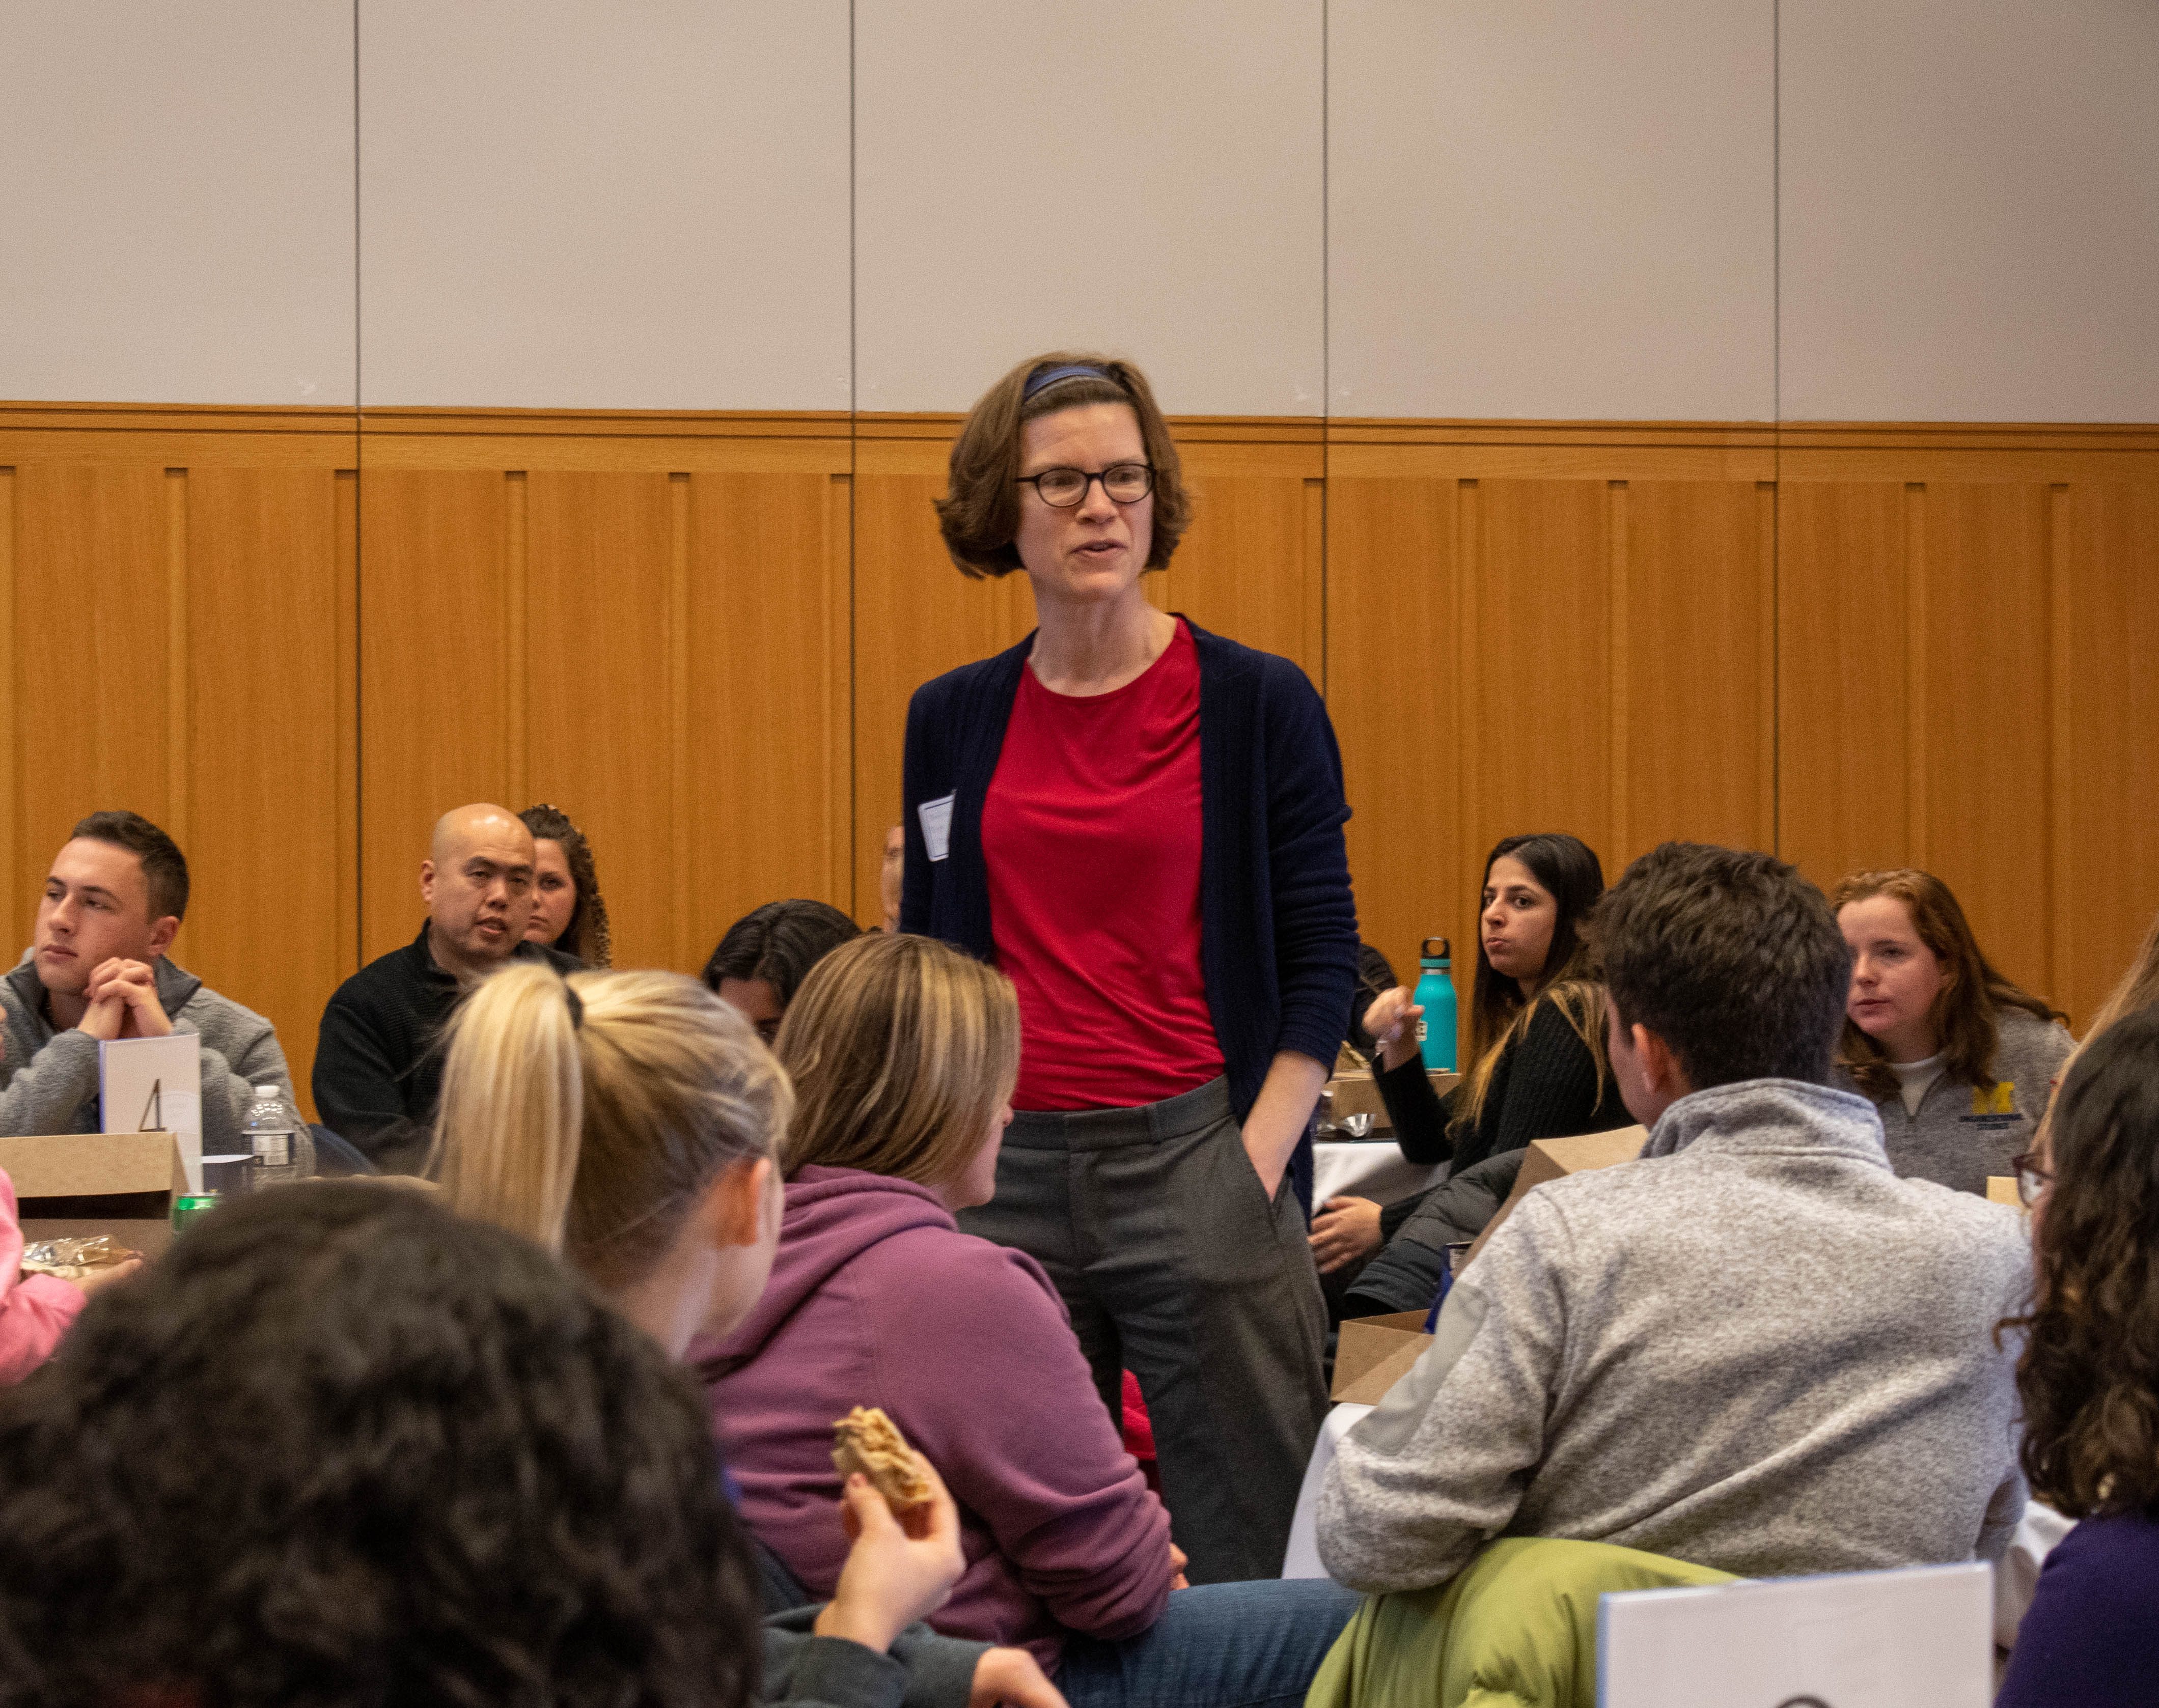 Beth Berman stands and introduces herself to newest cohort of OS admits at OS Orientation in 2019